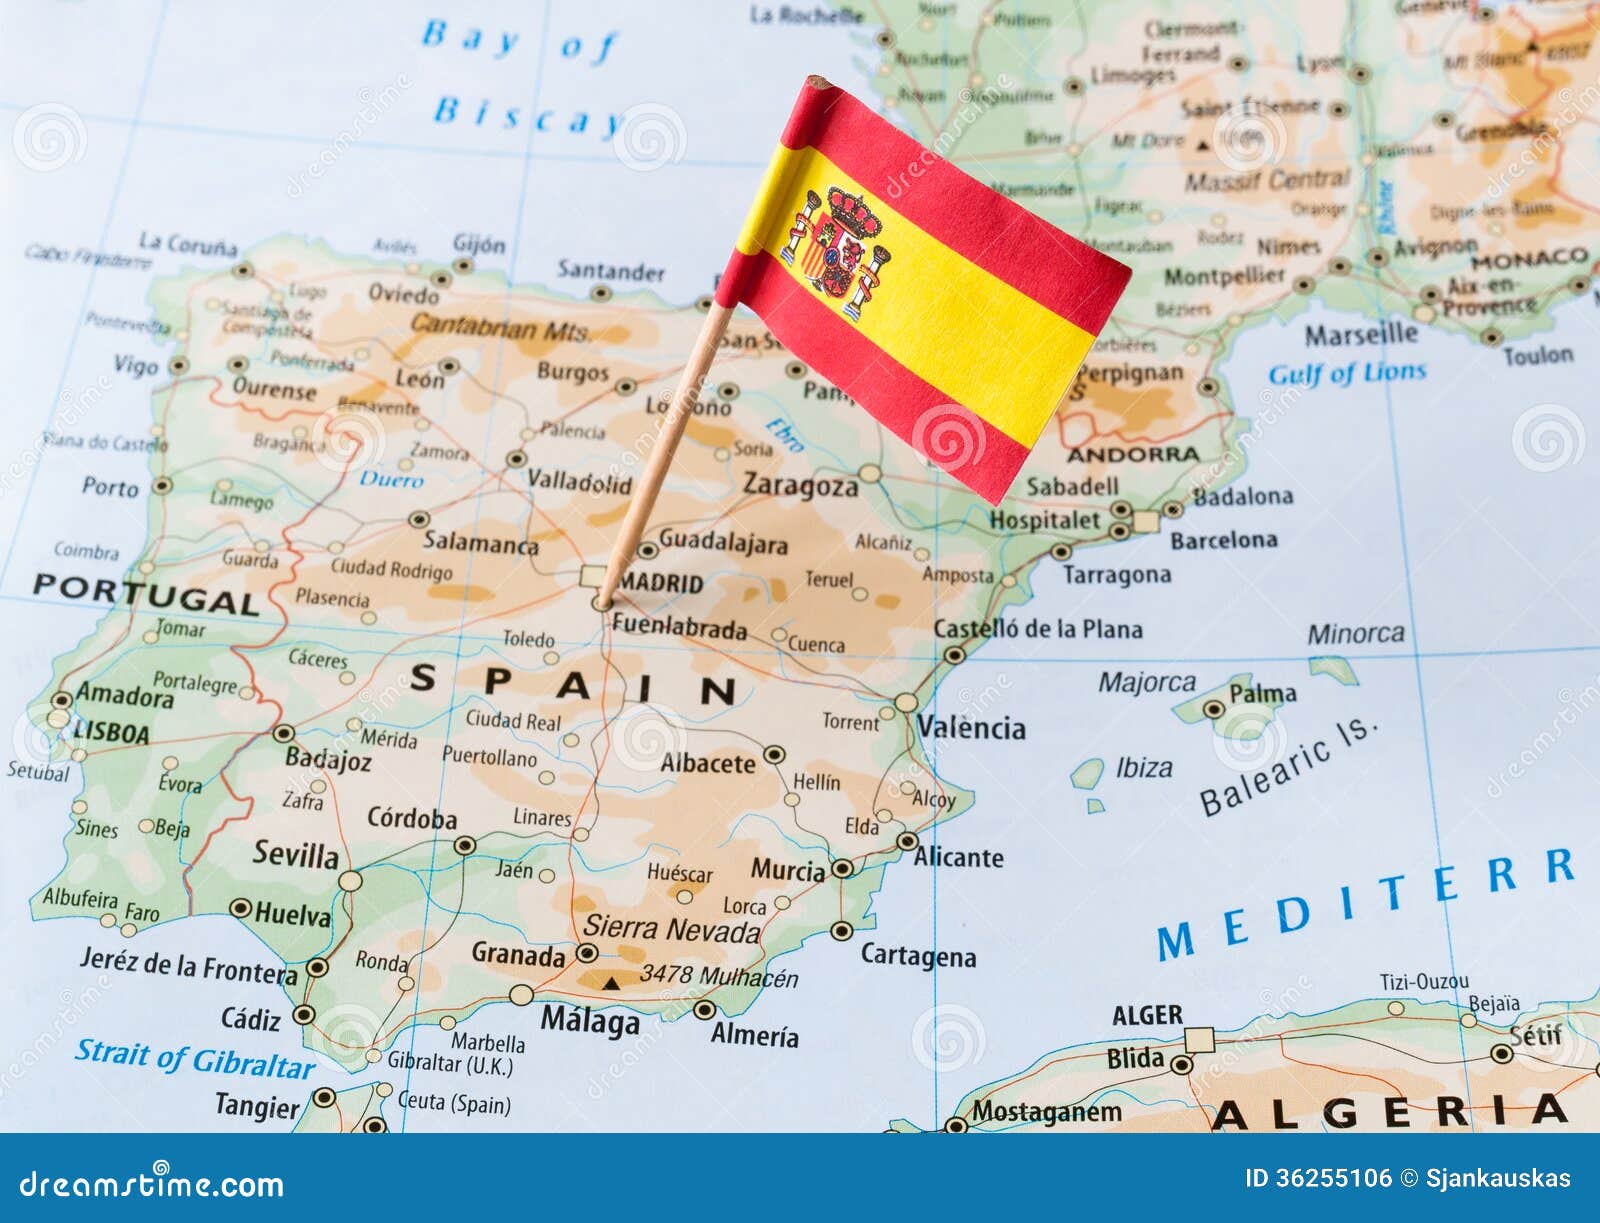 spain on map